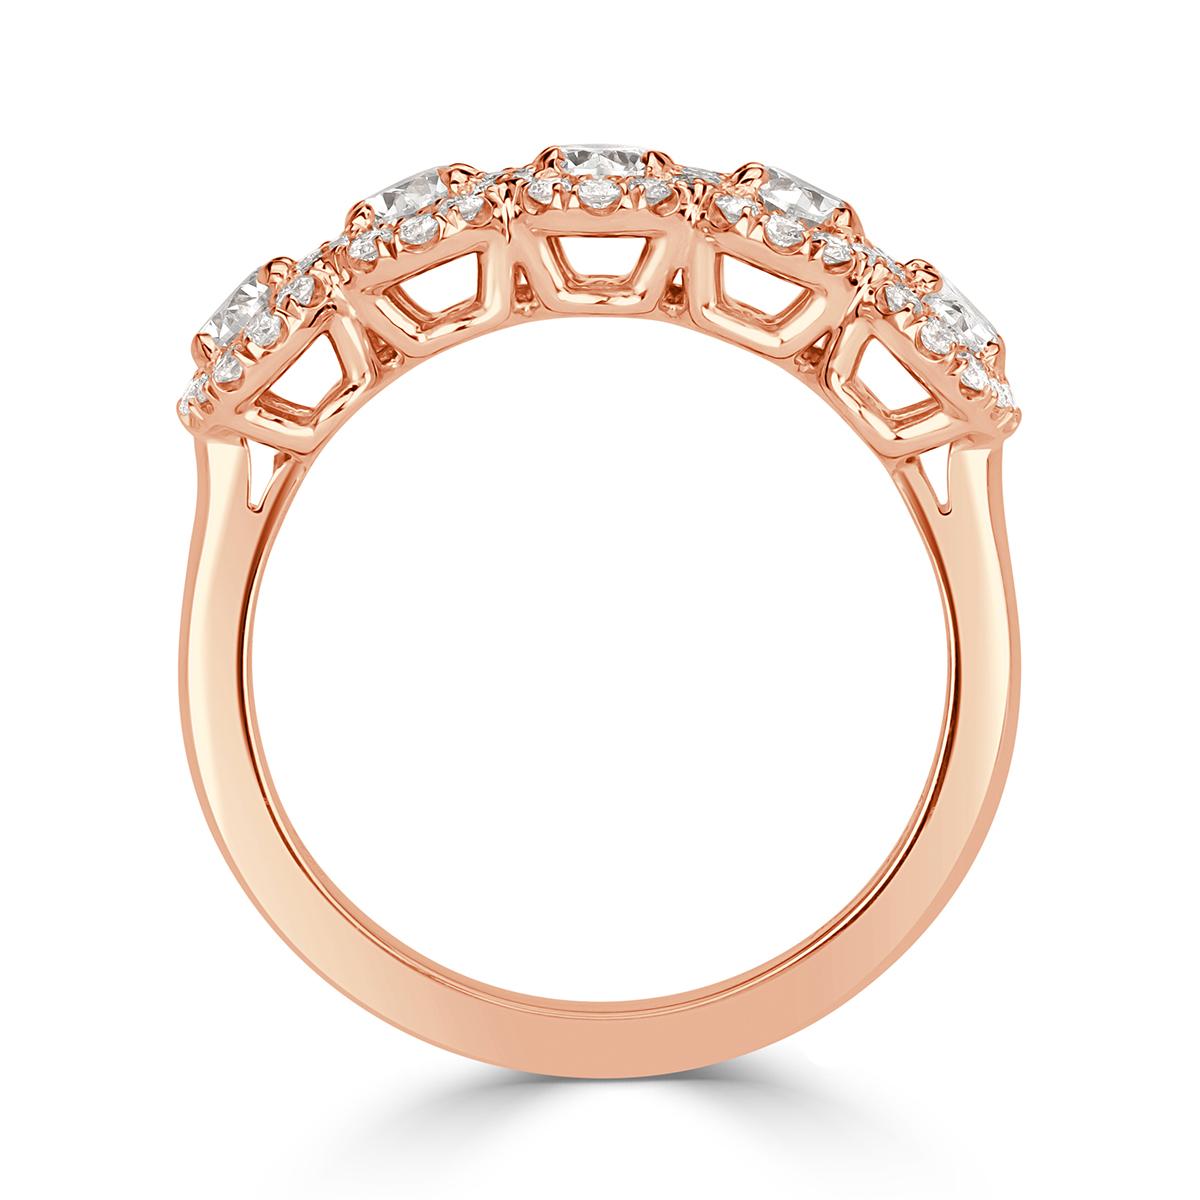 This elegant diamond ring showcases an exquisite five stone design composed of larger oval cut diamonds each surrounded by a halo of shimmering round brilliant cut diamonds. They are set in 18k rose gold and graded at E-F in color, VS1-VS2 in